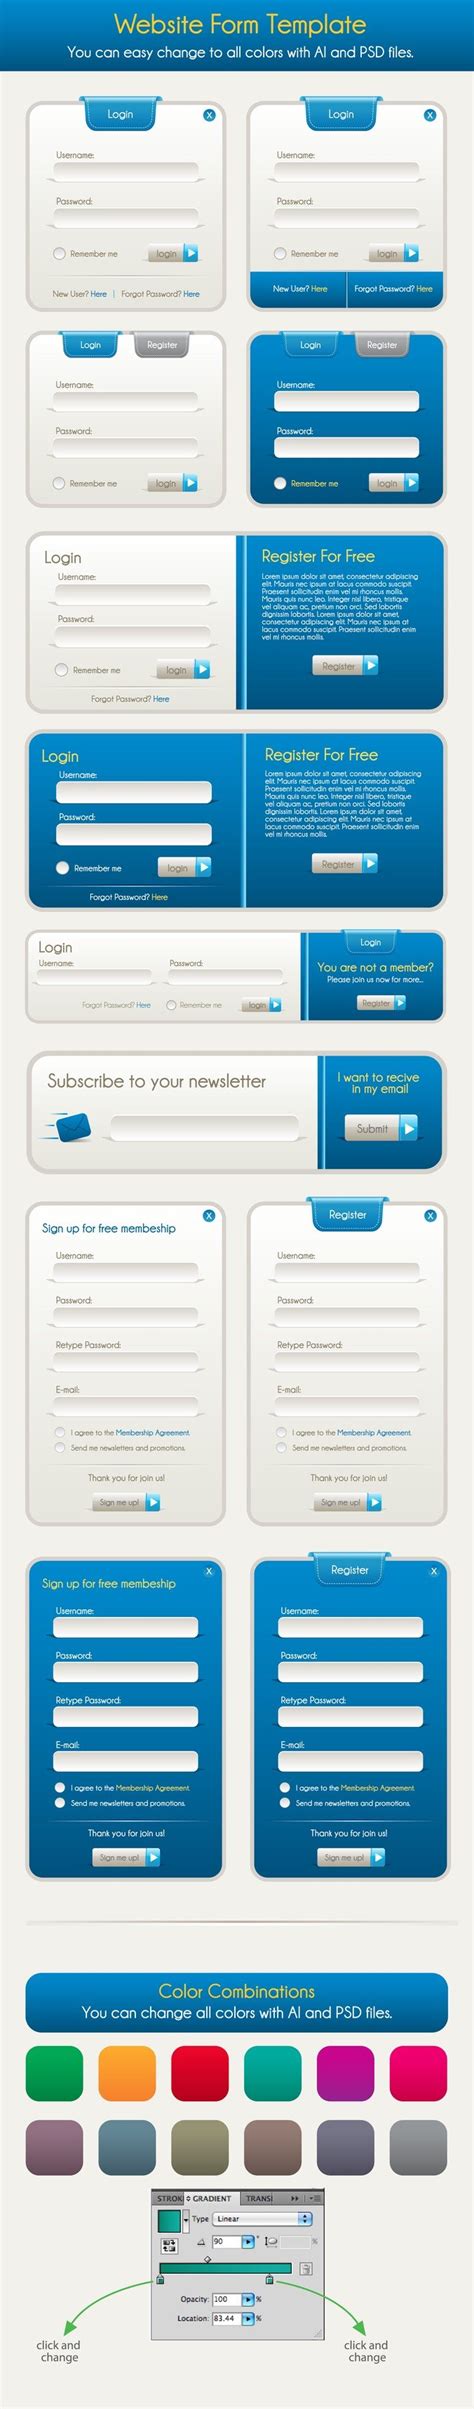 Register And Login Form Free Psd Download Freeimages